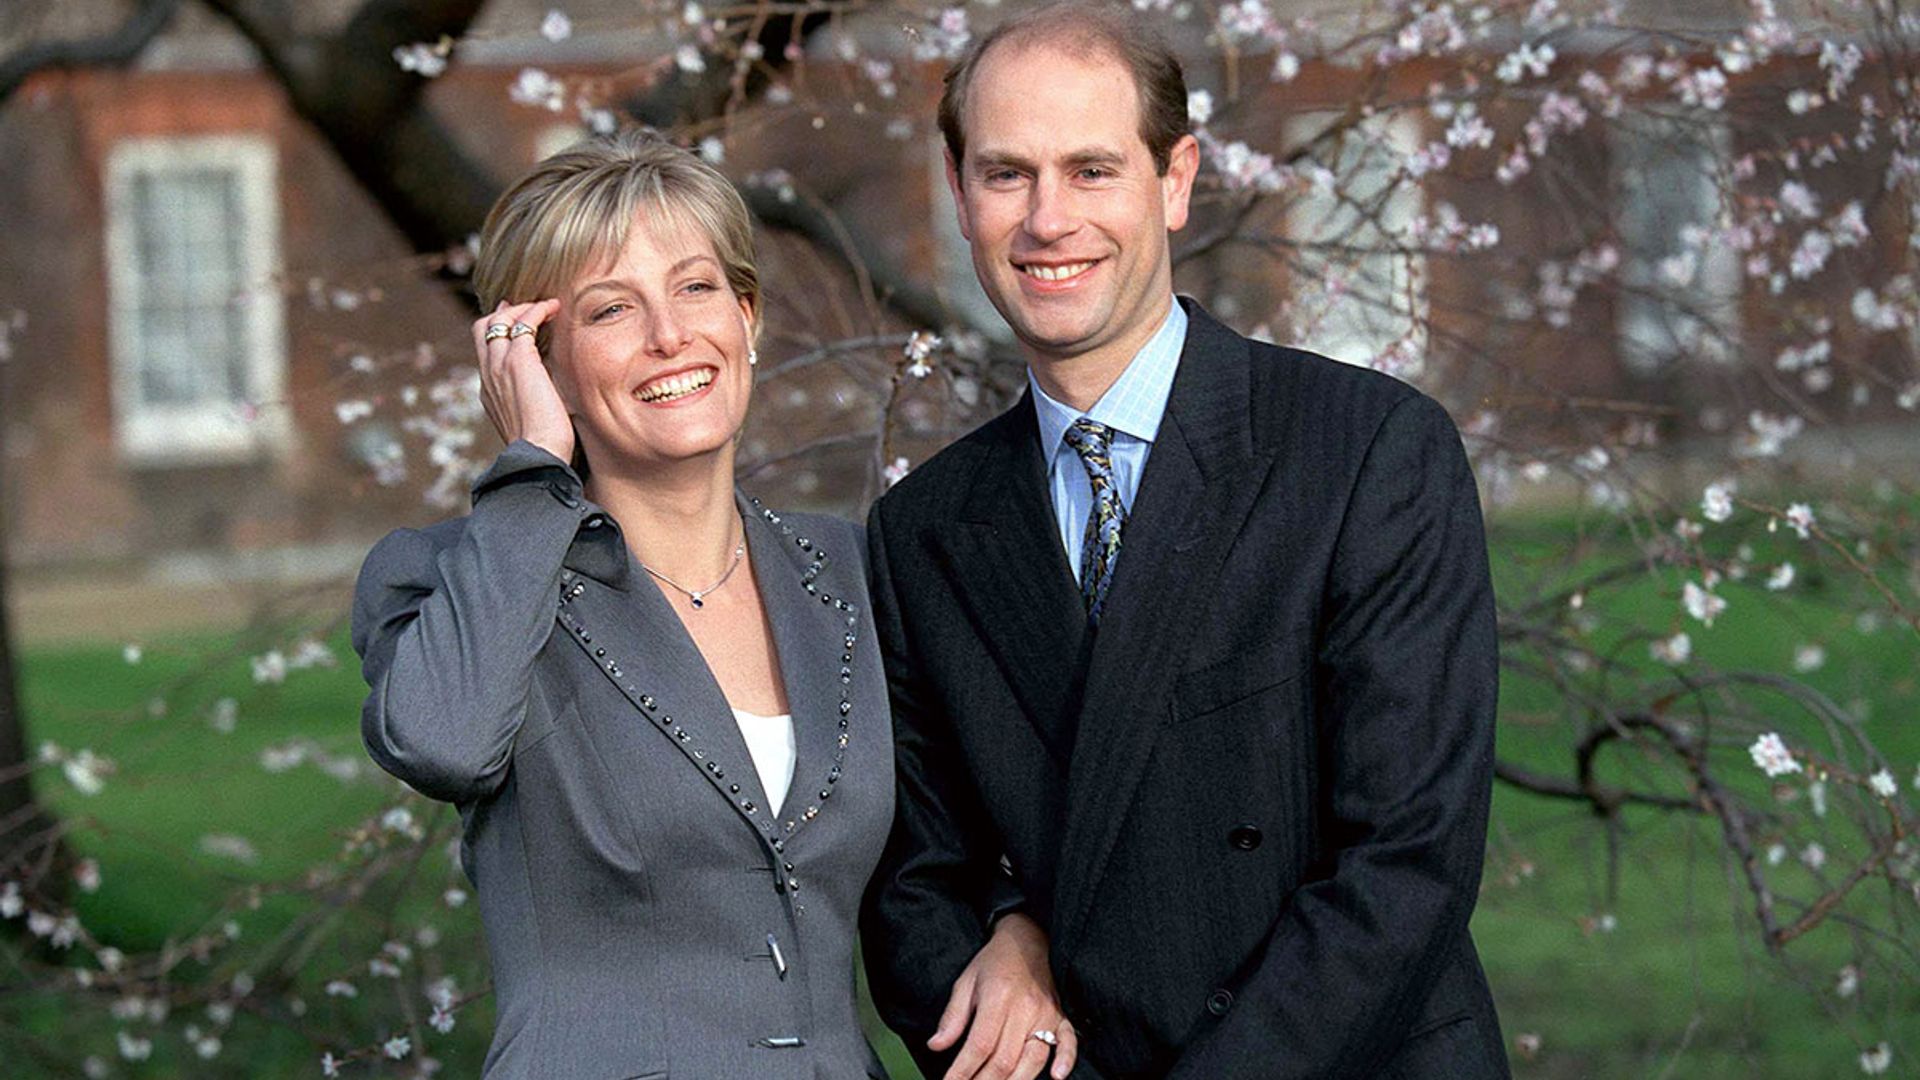 The Countess of Wessex said the sweetest thing about Prince Edward at their engagement announcement